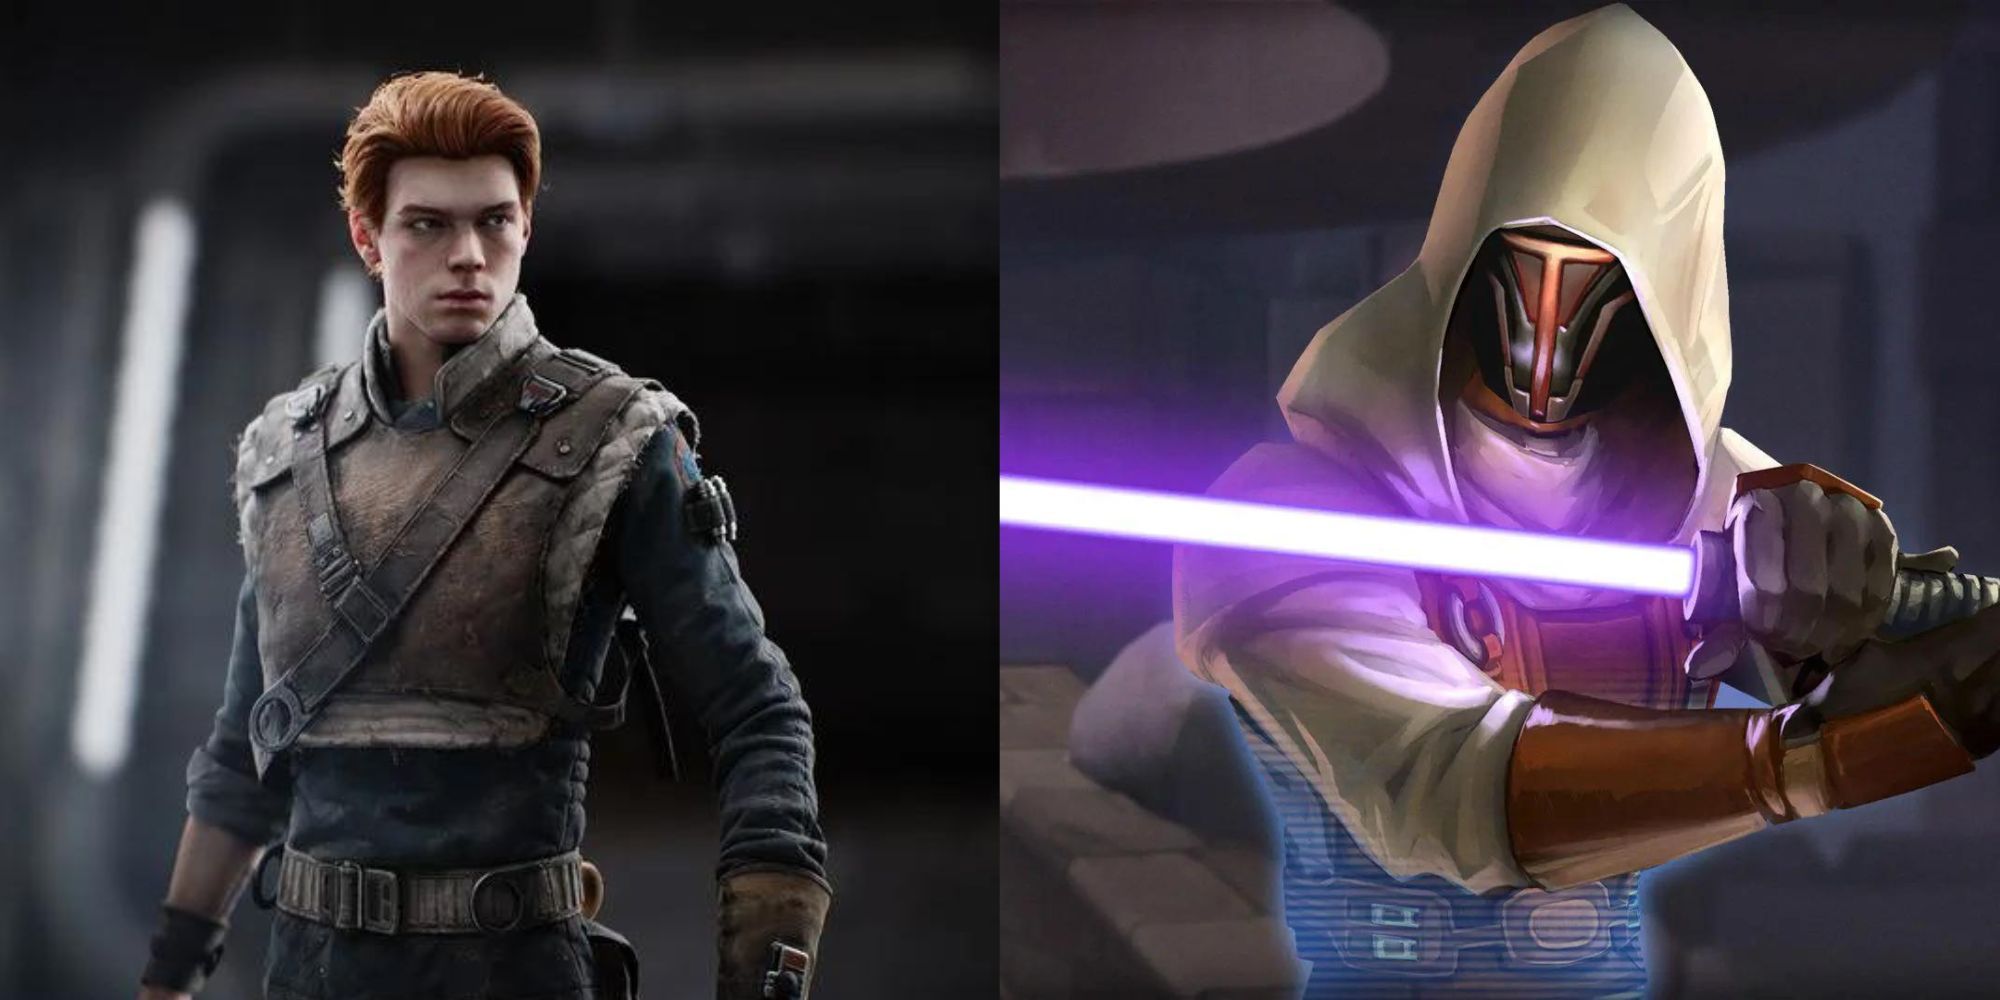 Image shows Cal Kestis and Revan, two Star Wars Jedi with Dark Force abilities.